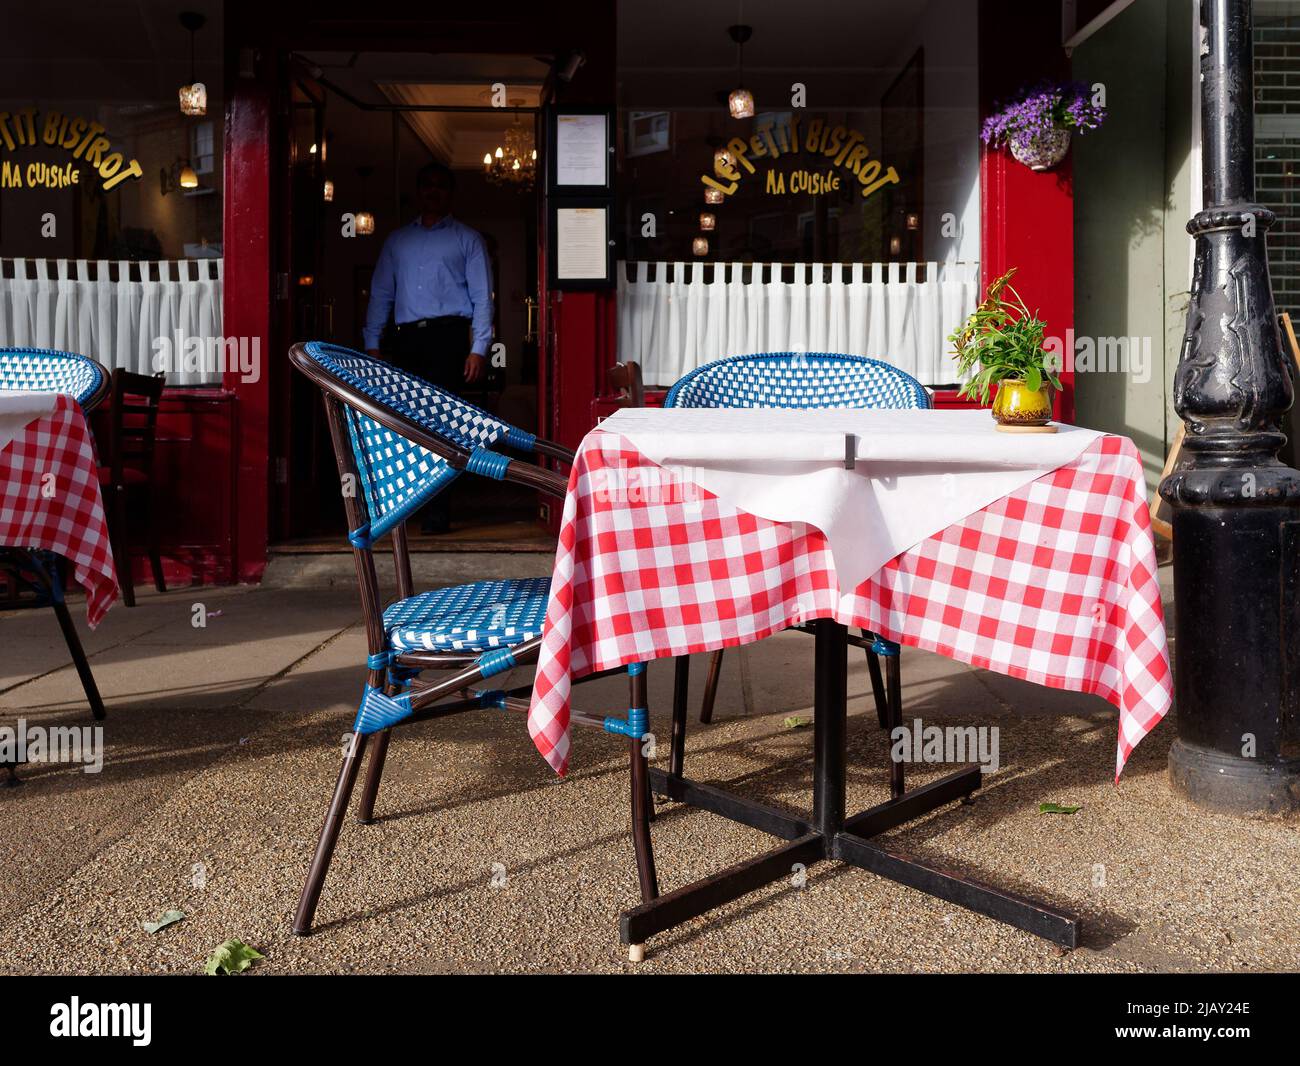 Ma Cuisine La Petit Bistro in the village of Kew. Waiter in a blue shirt with head obscured by shadows approaches the tables outside. London. Stock Photo